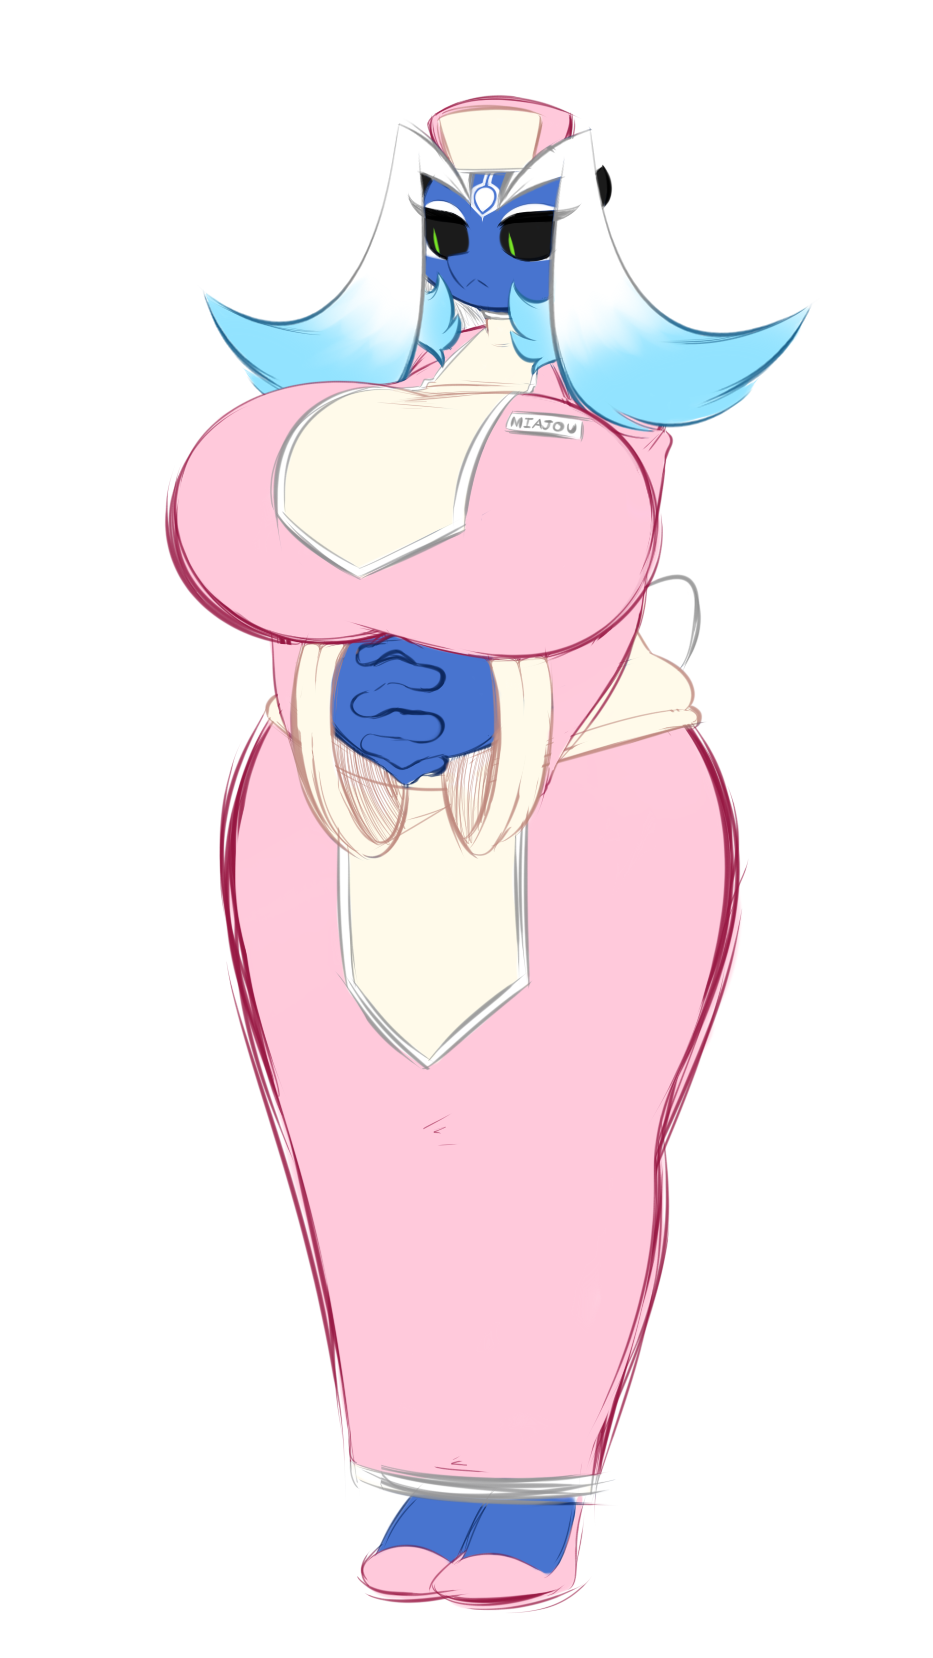 averyshadydolphin:  I decided to doodle Miajou in her spa uniform from when she was